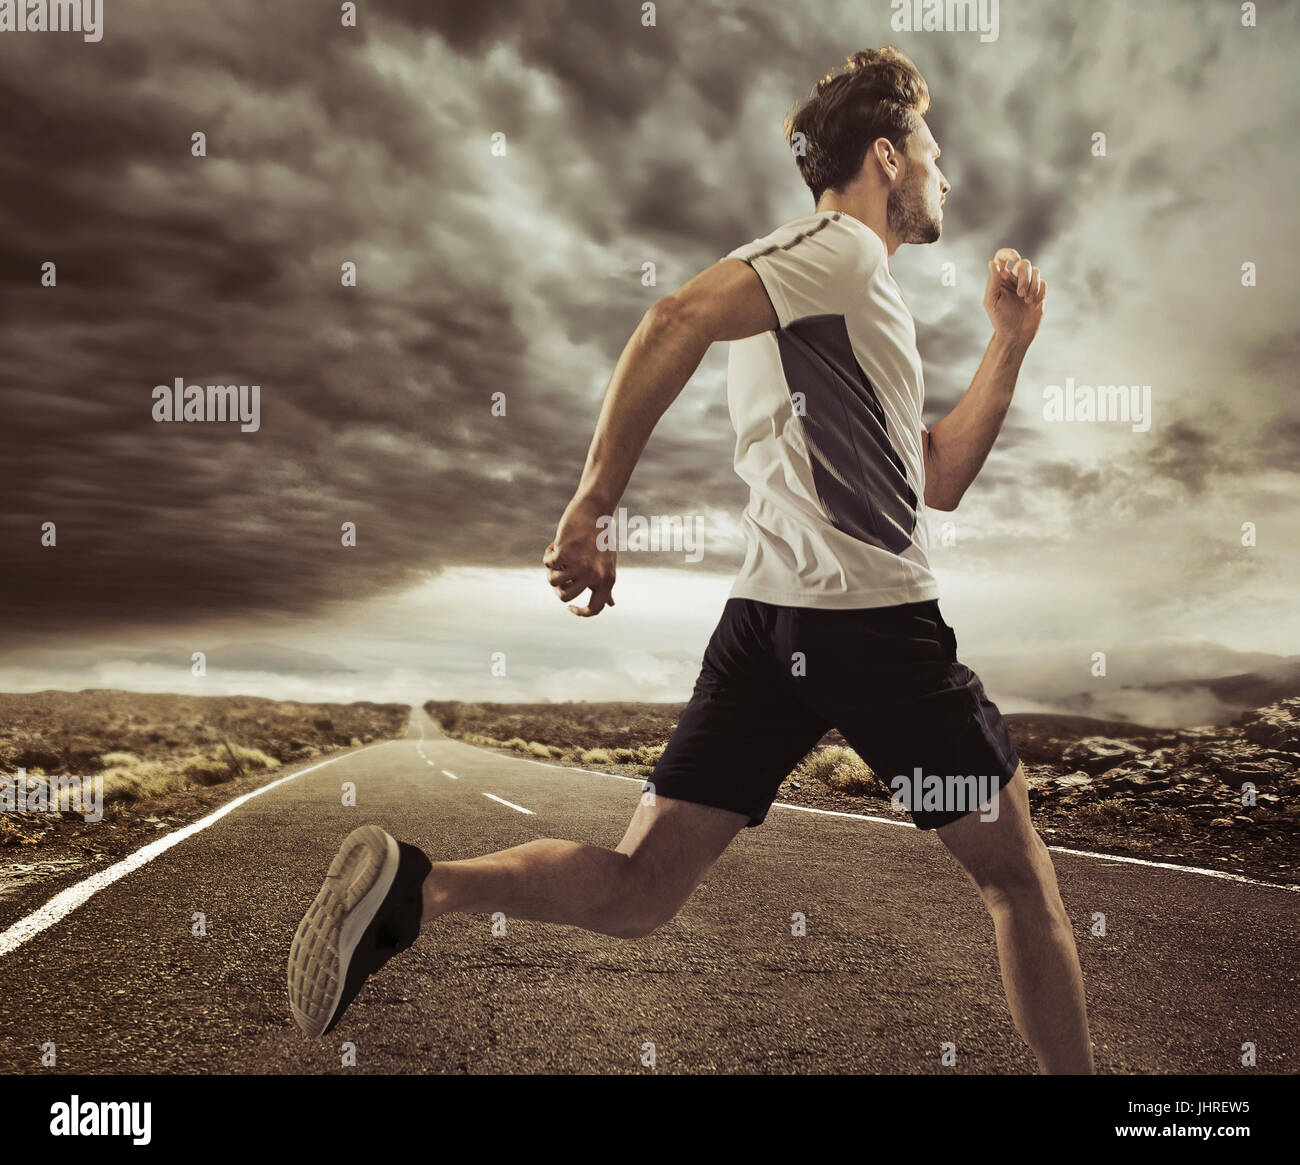 Portrait of a young runner in an expressive pose Stock Photo